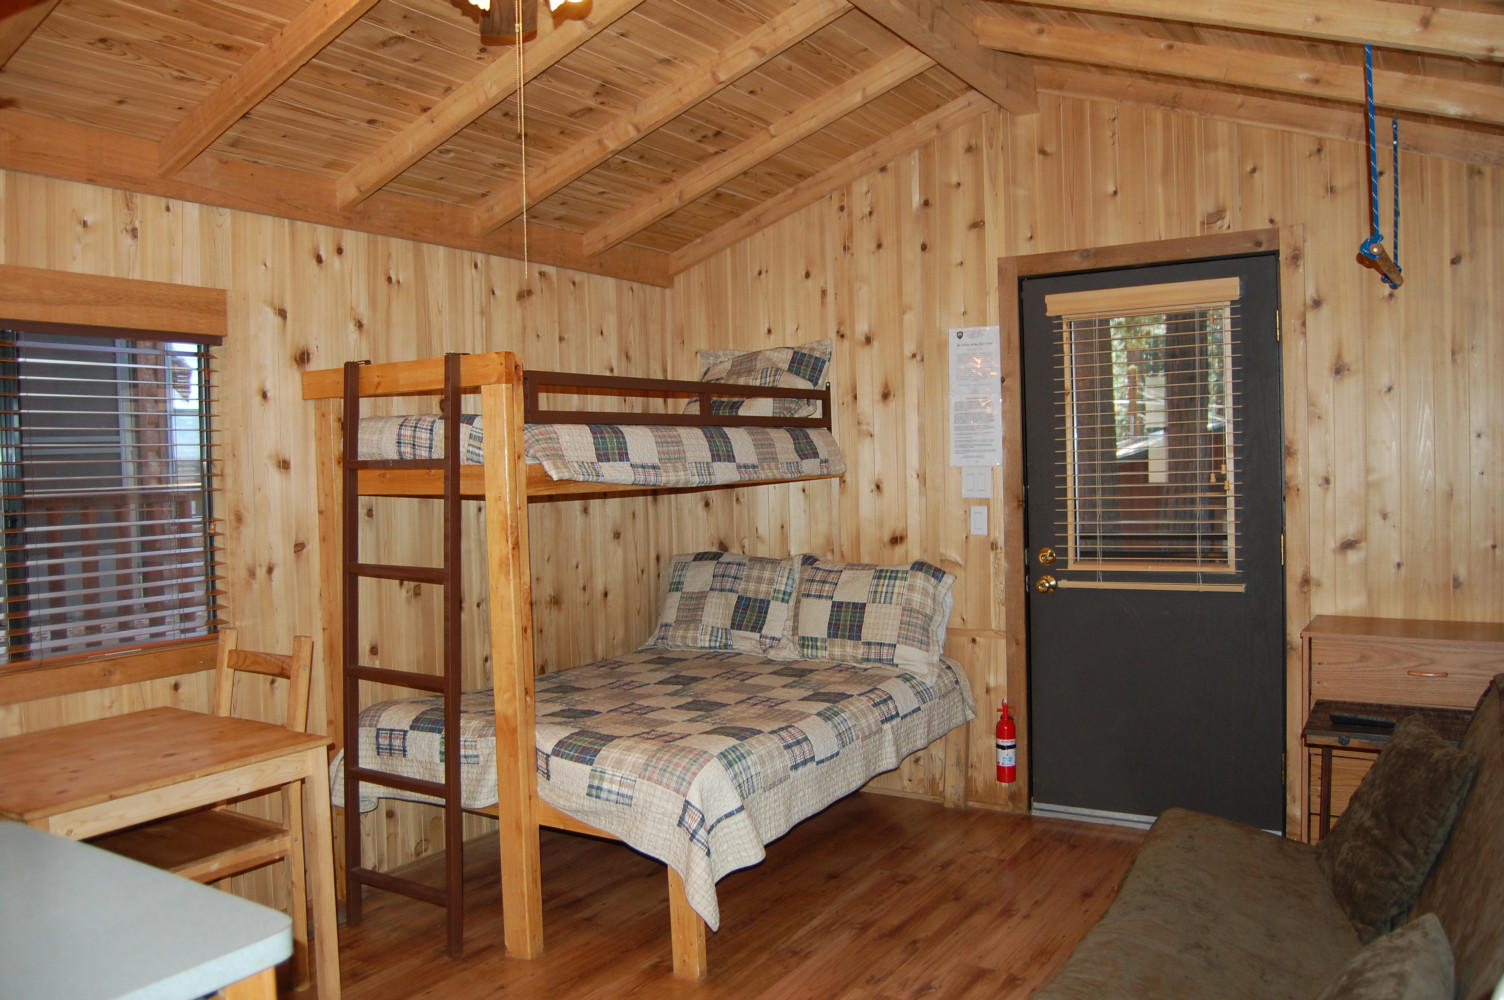 Inside view of studio cabin
with full bed & bunk beds